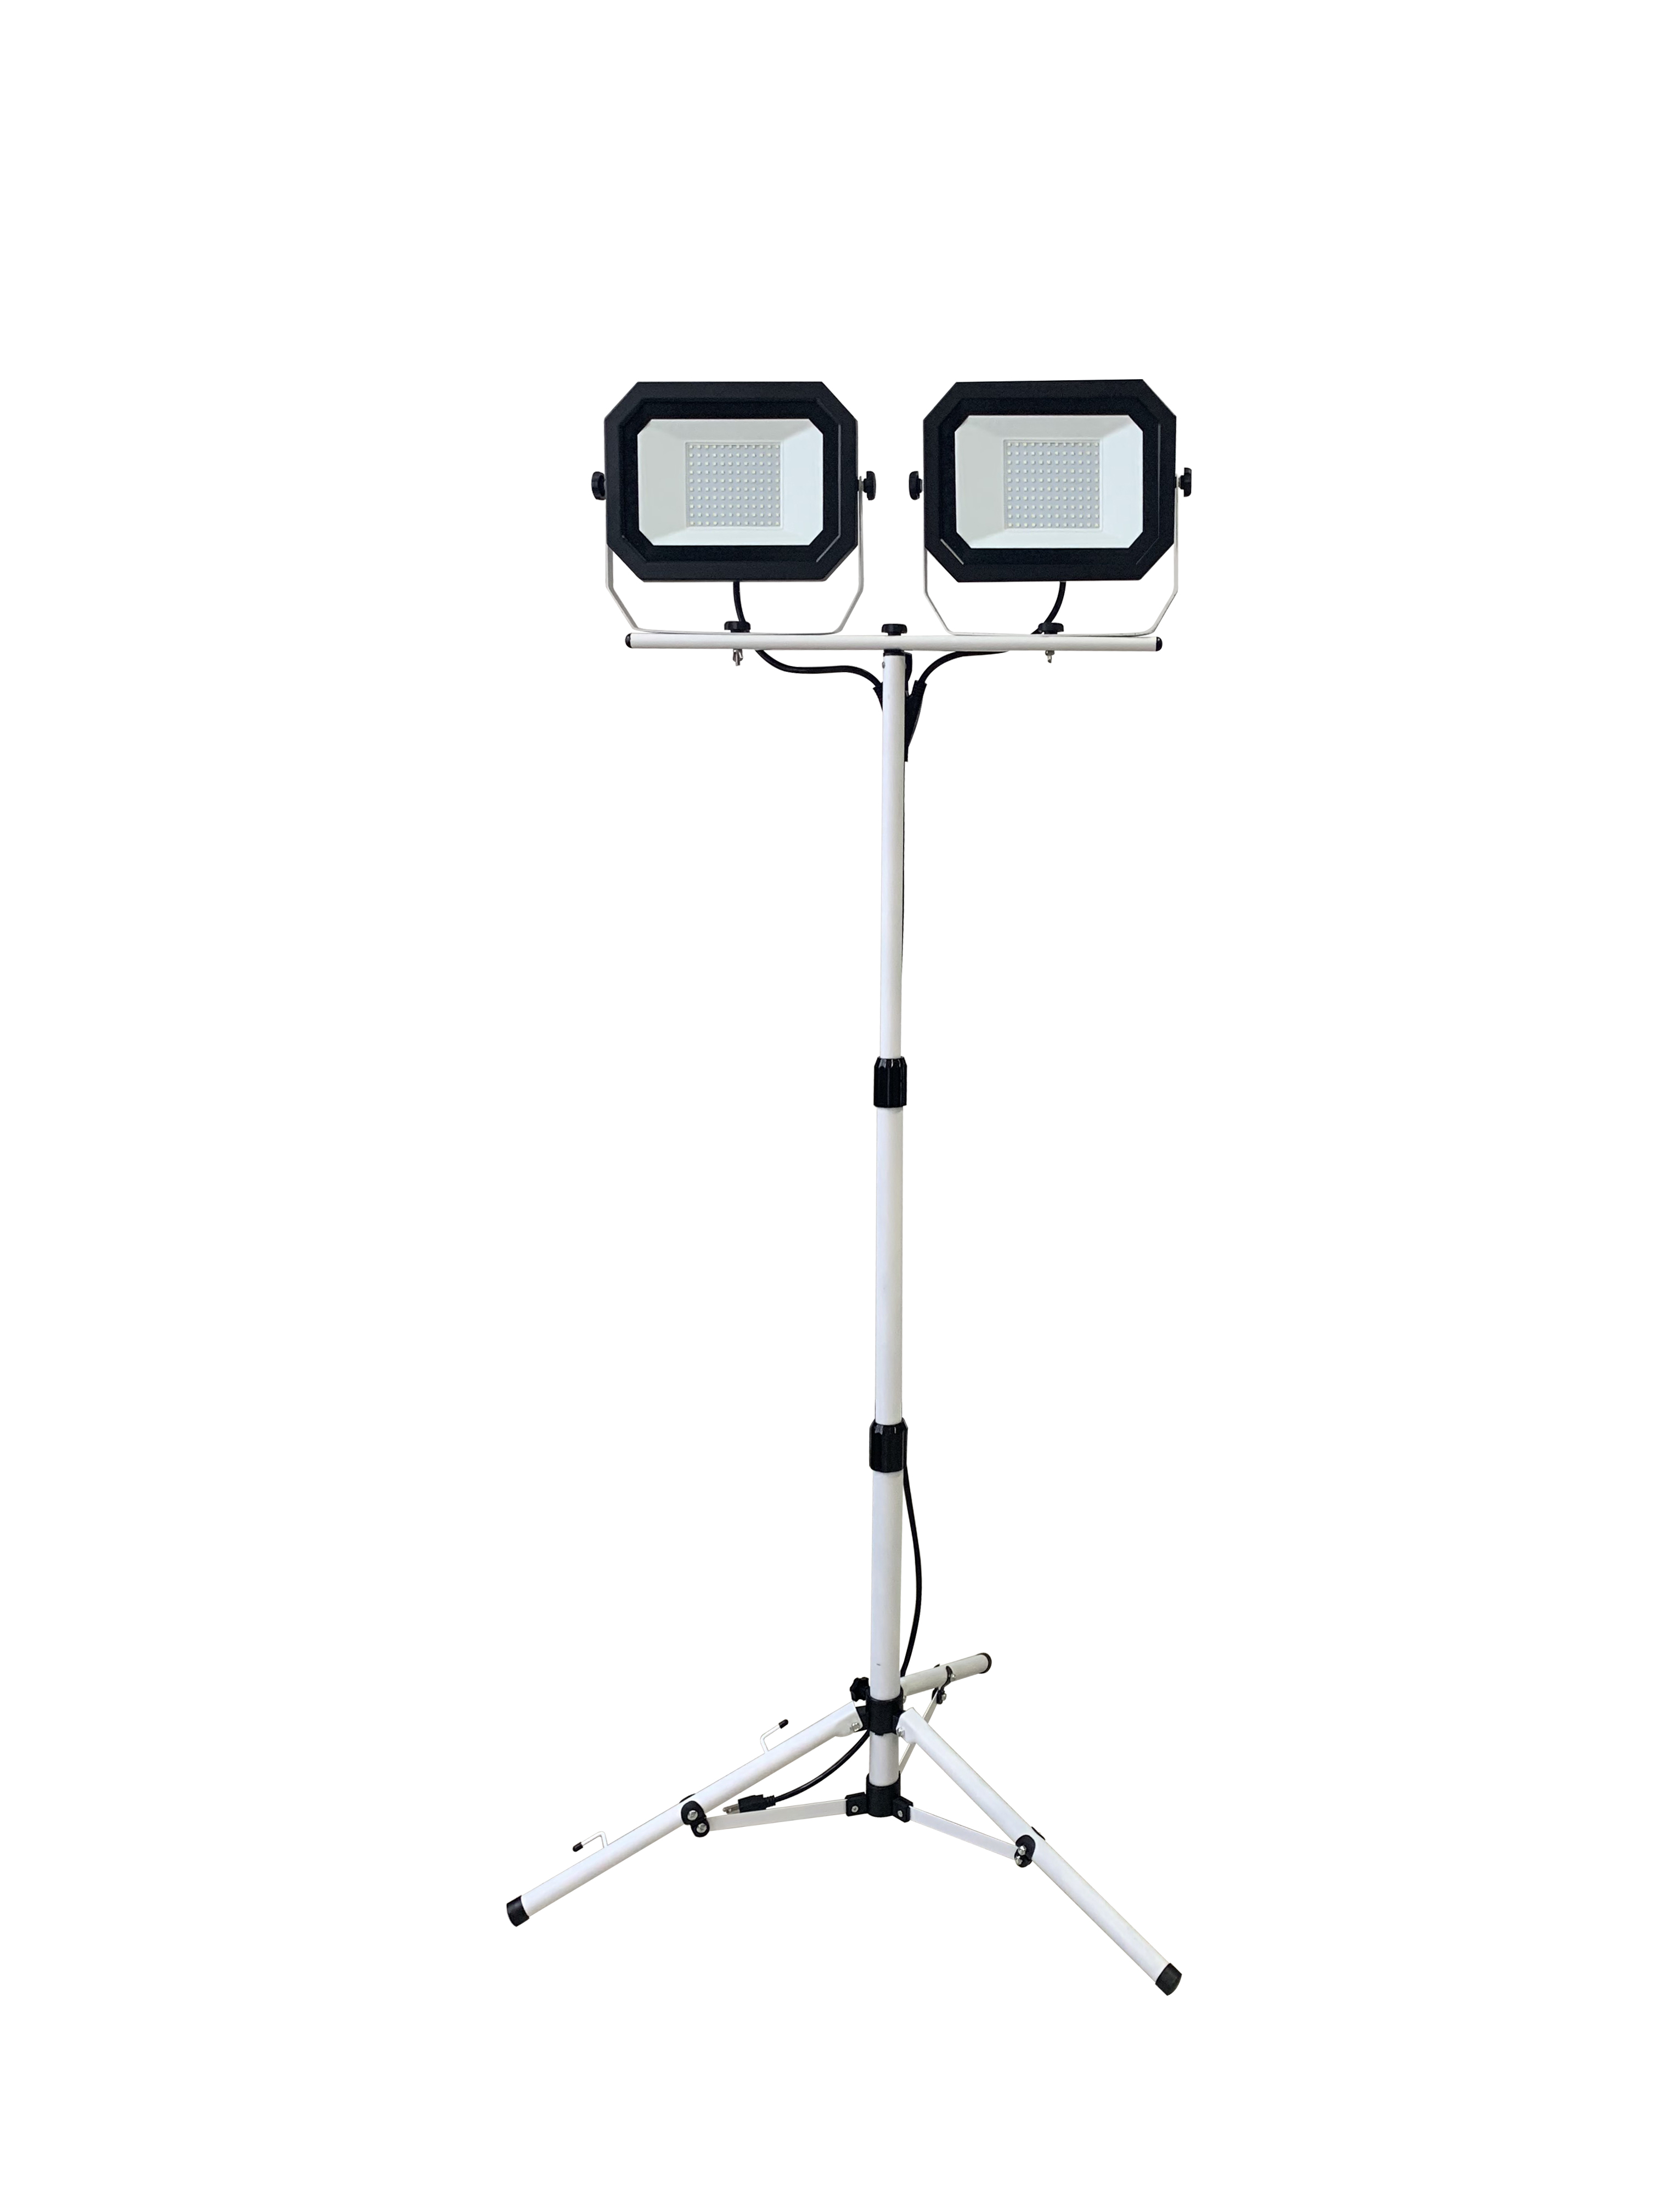 Double LED working floodlight with tripod Featured Image